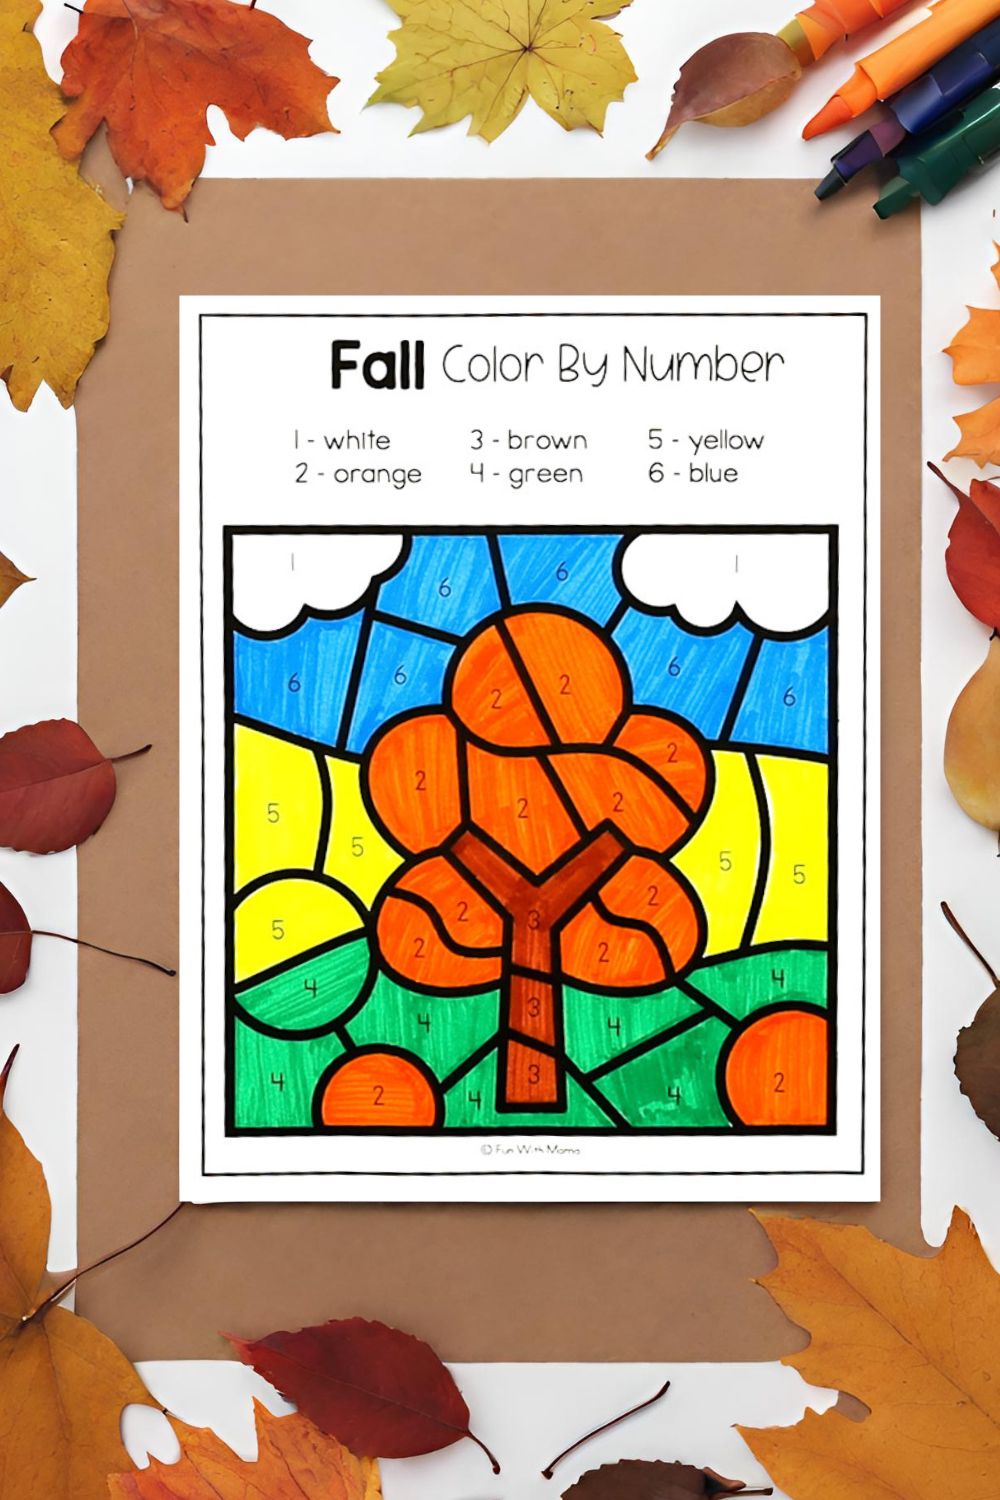 fall color by number coloring pages with a fall tree